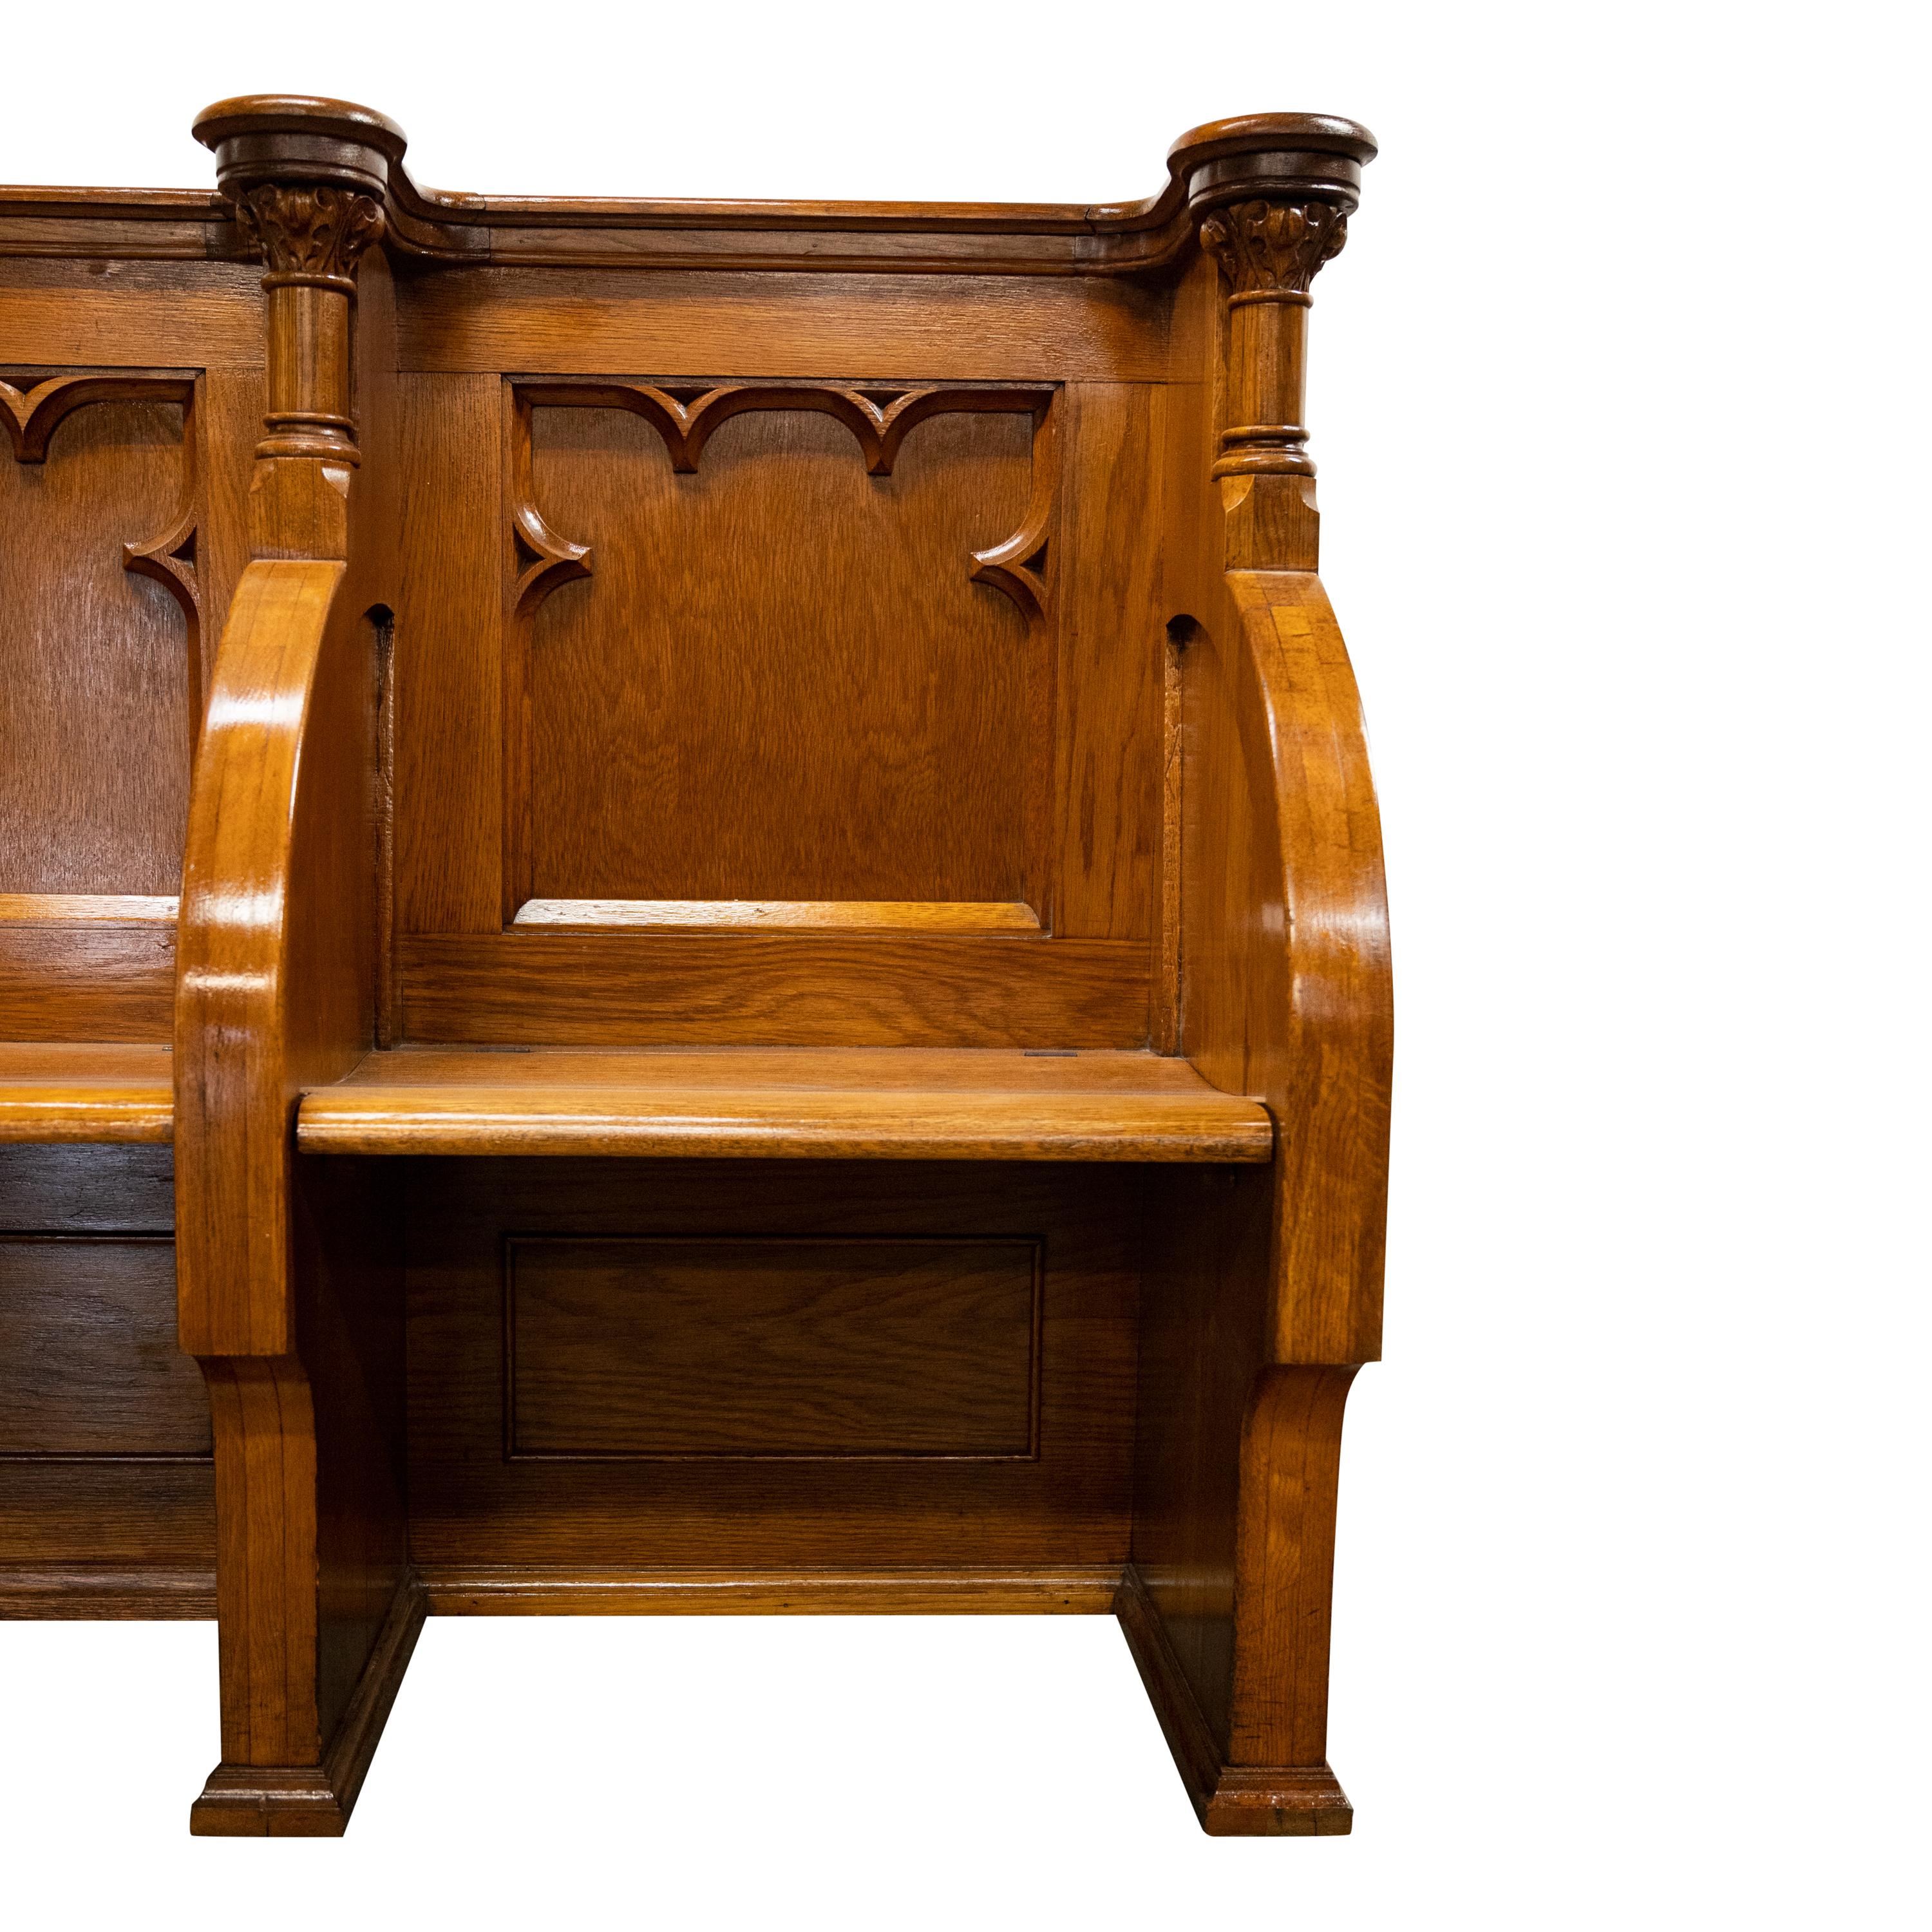 Antique Gothic Revival Pugin Carved Oak Church 3 Seat Pew Bench Choir Stall 1850 6